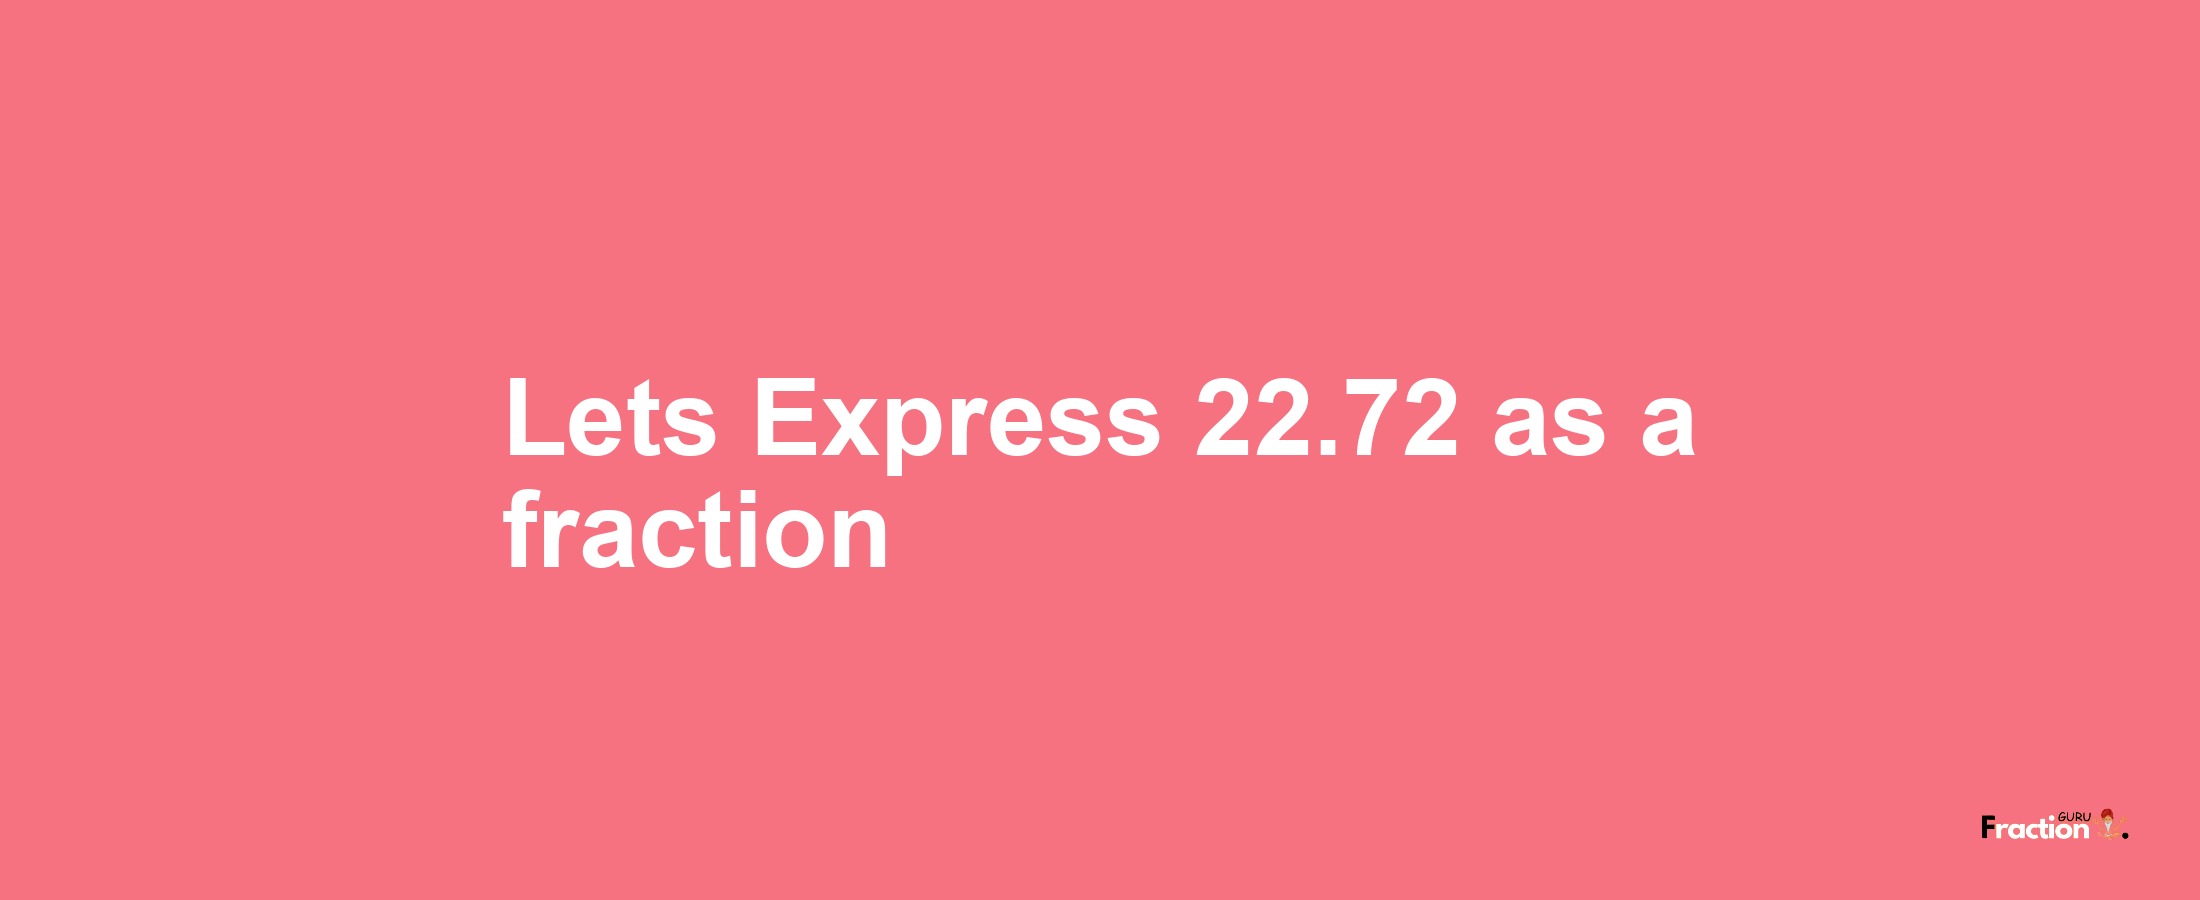 Lets Express 22.72 as afraction